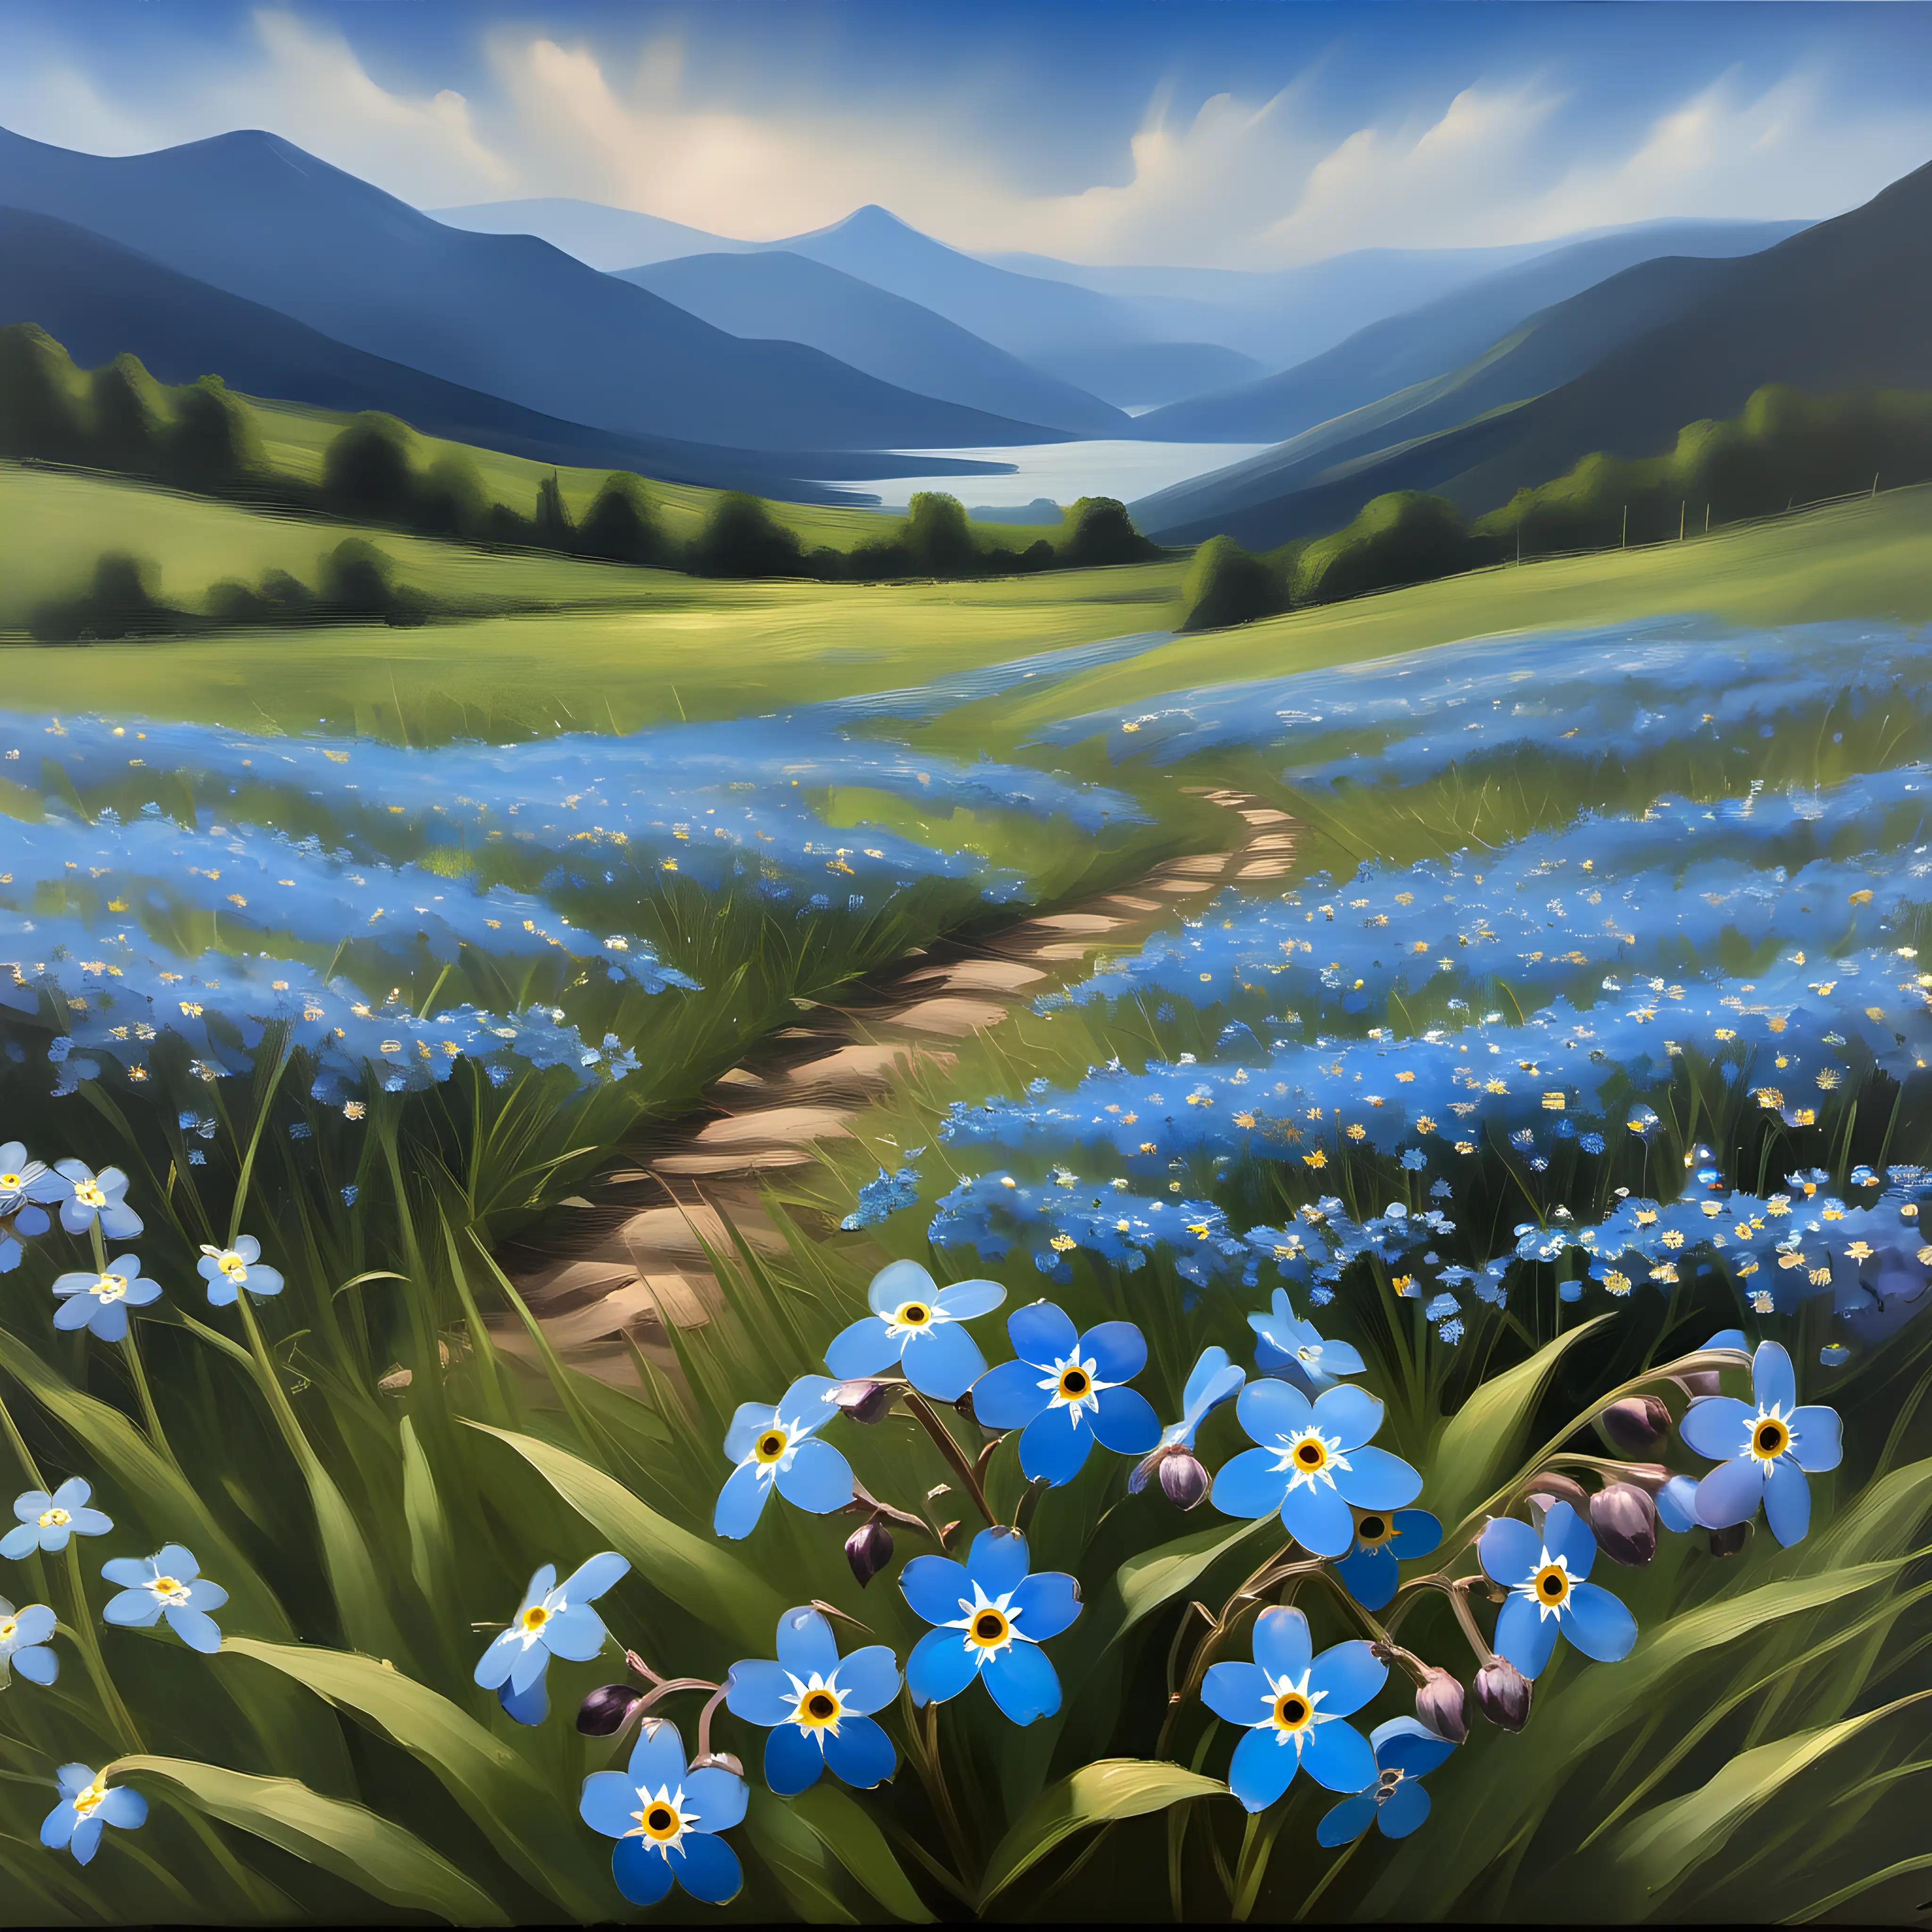 Vibrant Oil Painting of ForgetMeNot Flowers Amid Mountain Scenery